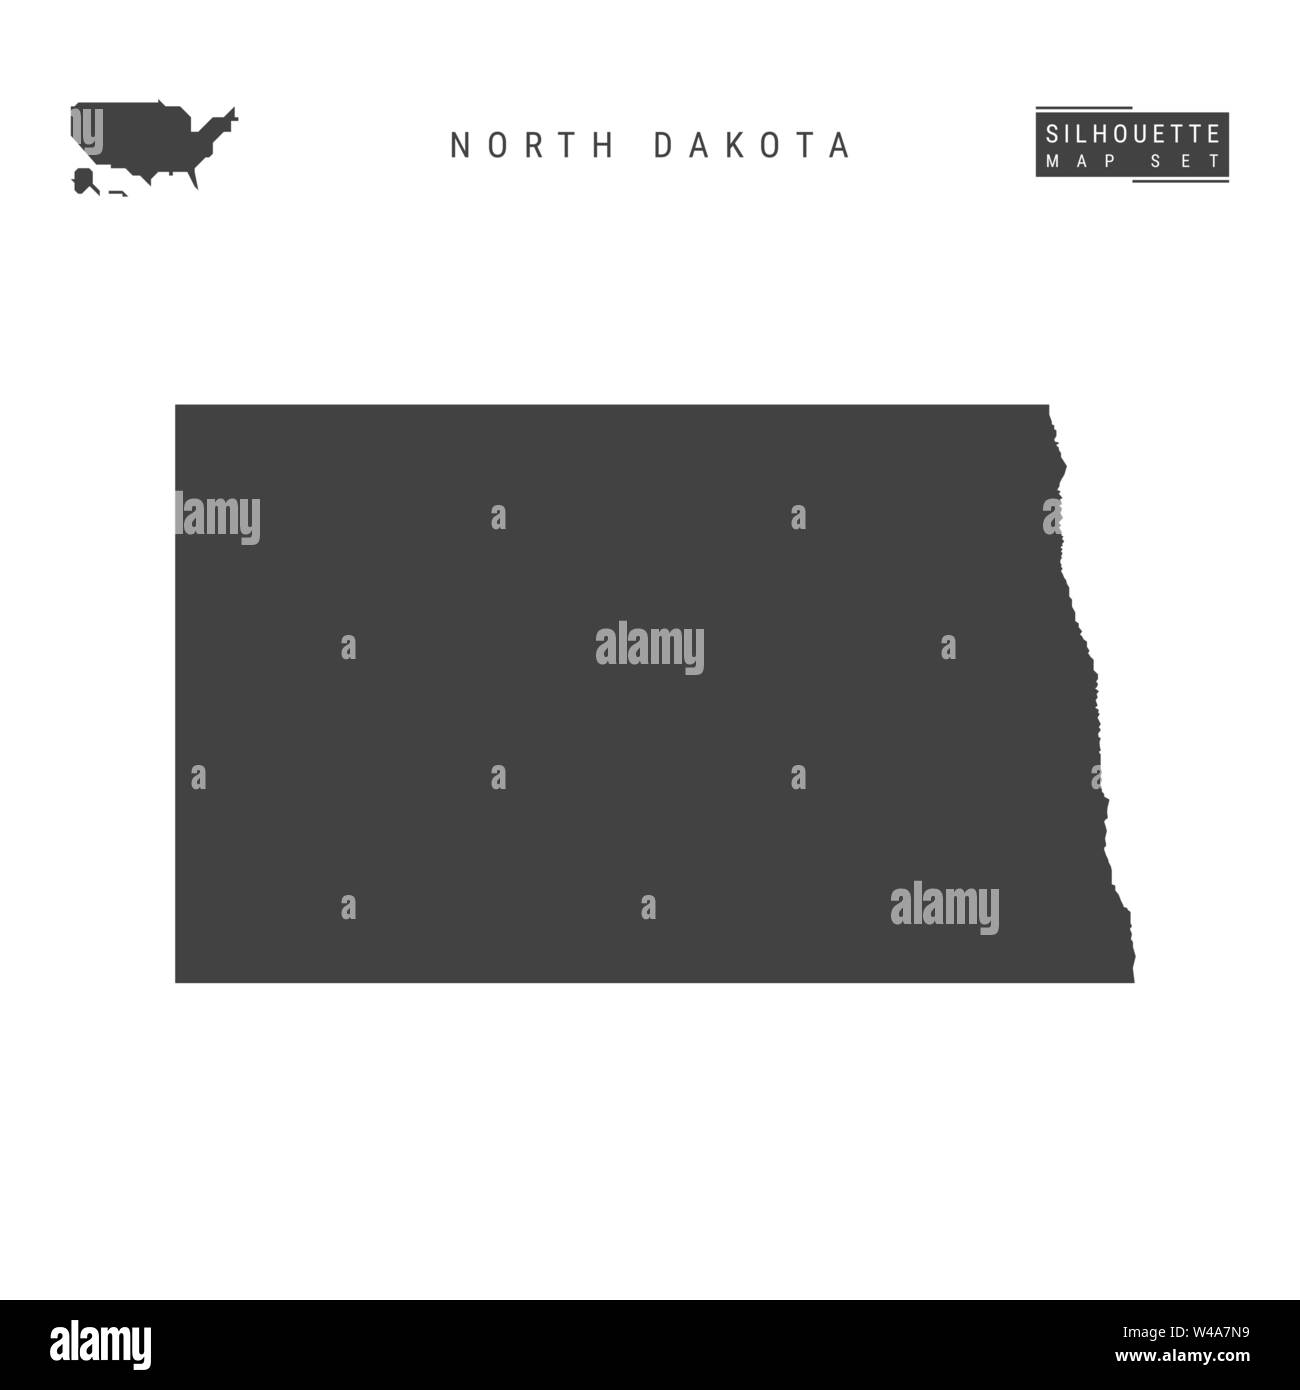 North Dakota US State Blank Vector Map Isolated on White Background. High-Detailed Black Silhouette Map of North Dakota. Stock Vector